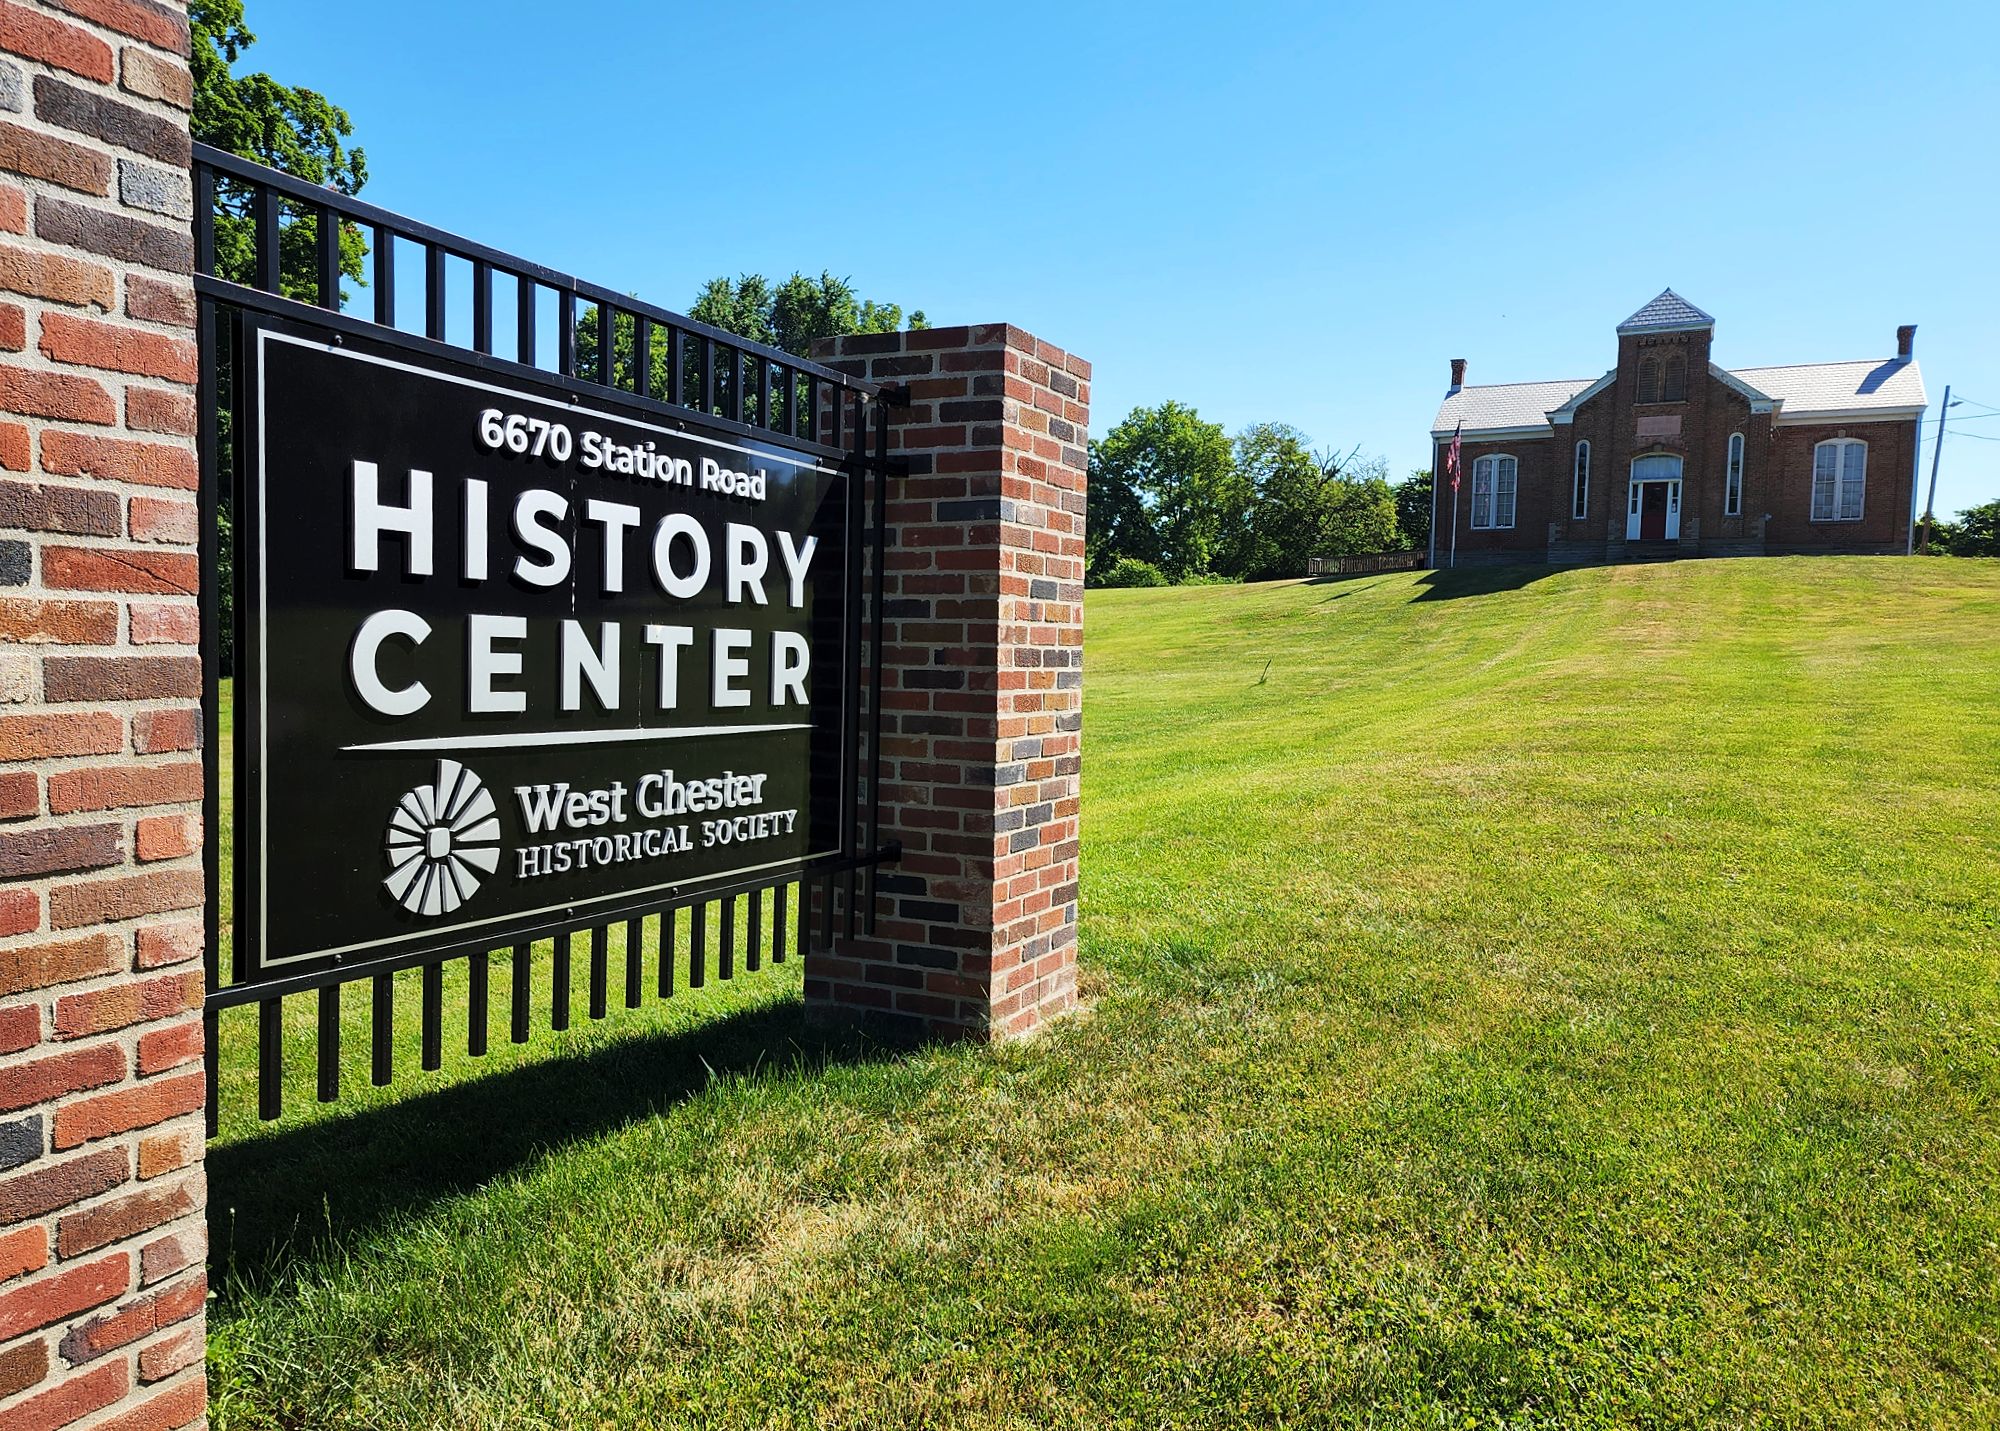 West Chester historical society soon to unveil new museum site